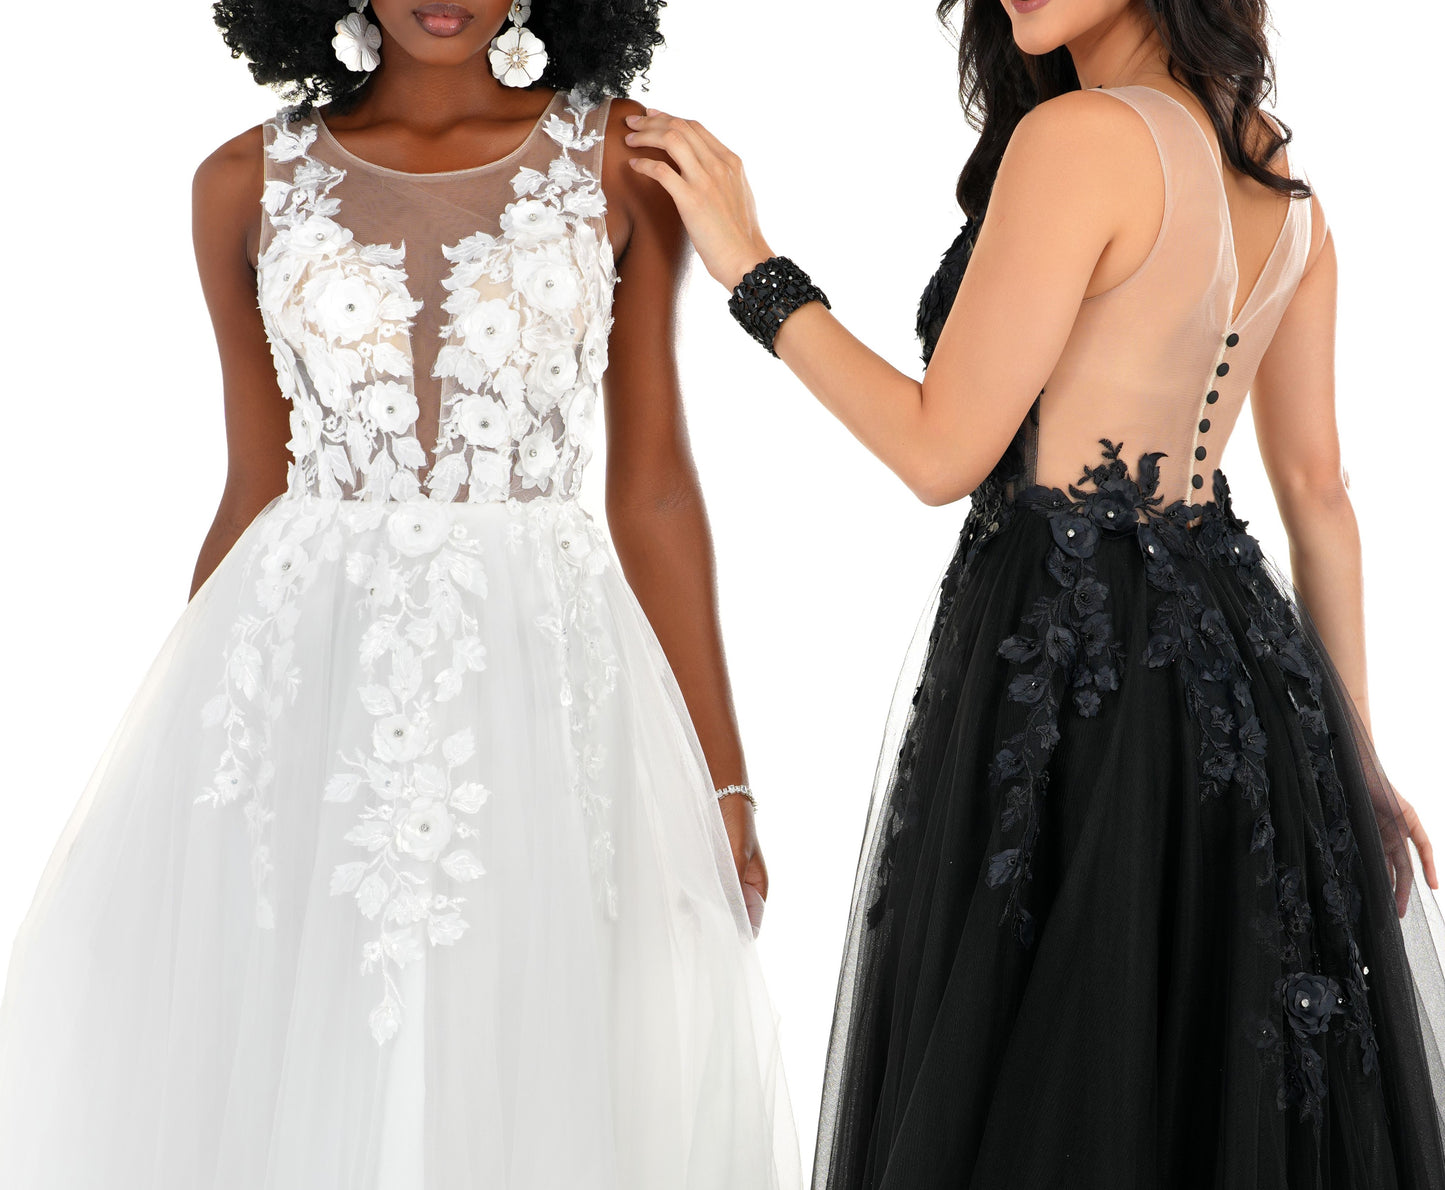 This exquisite wedding dress is crafted with sheer black and floral 3D lace detail. The Sheer high neck and  back button illusion closure creates a sophisticated silhouette, perfect for a special occasion. The Cecilia Couture 1522 ballgown is a timeless, stylish choice. A ine with a tulle skirt & Sheer Rhinestone Embellished dimensional Lace.  Sizes: 4-18  Colors: Black, White